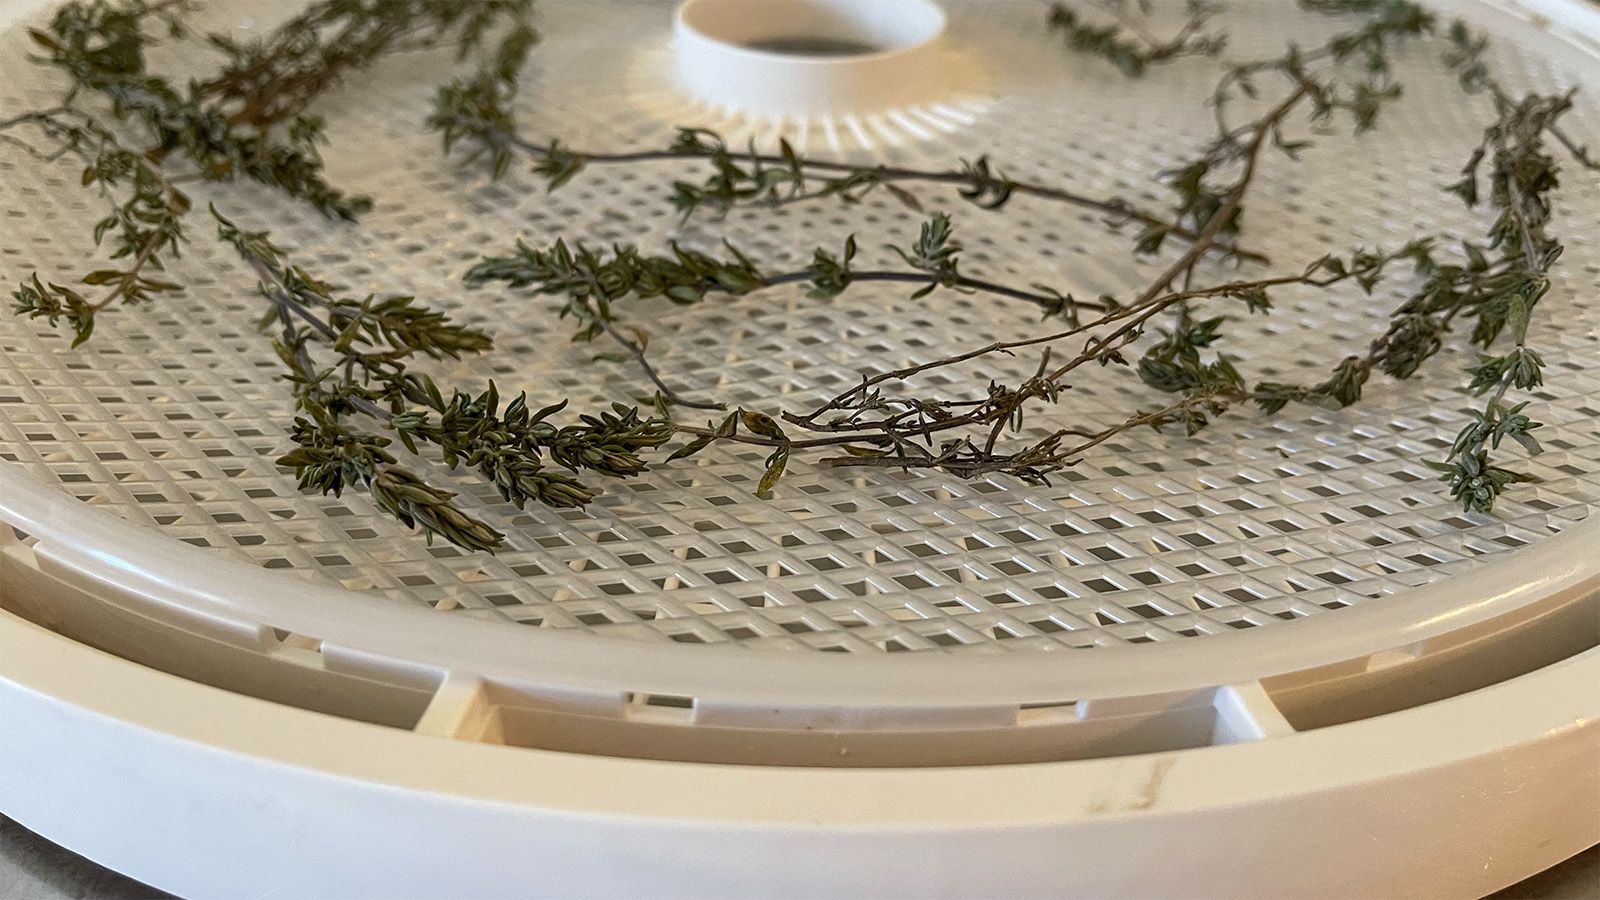 Drying Herbs With a Food Dehydrator